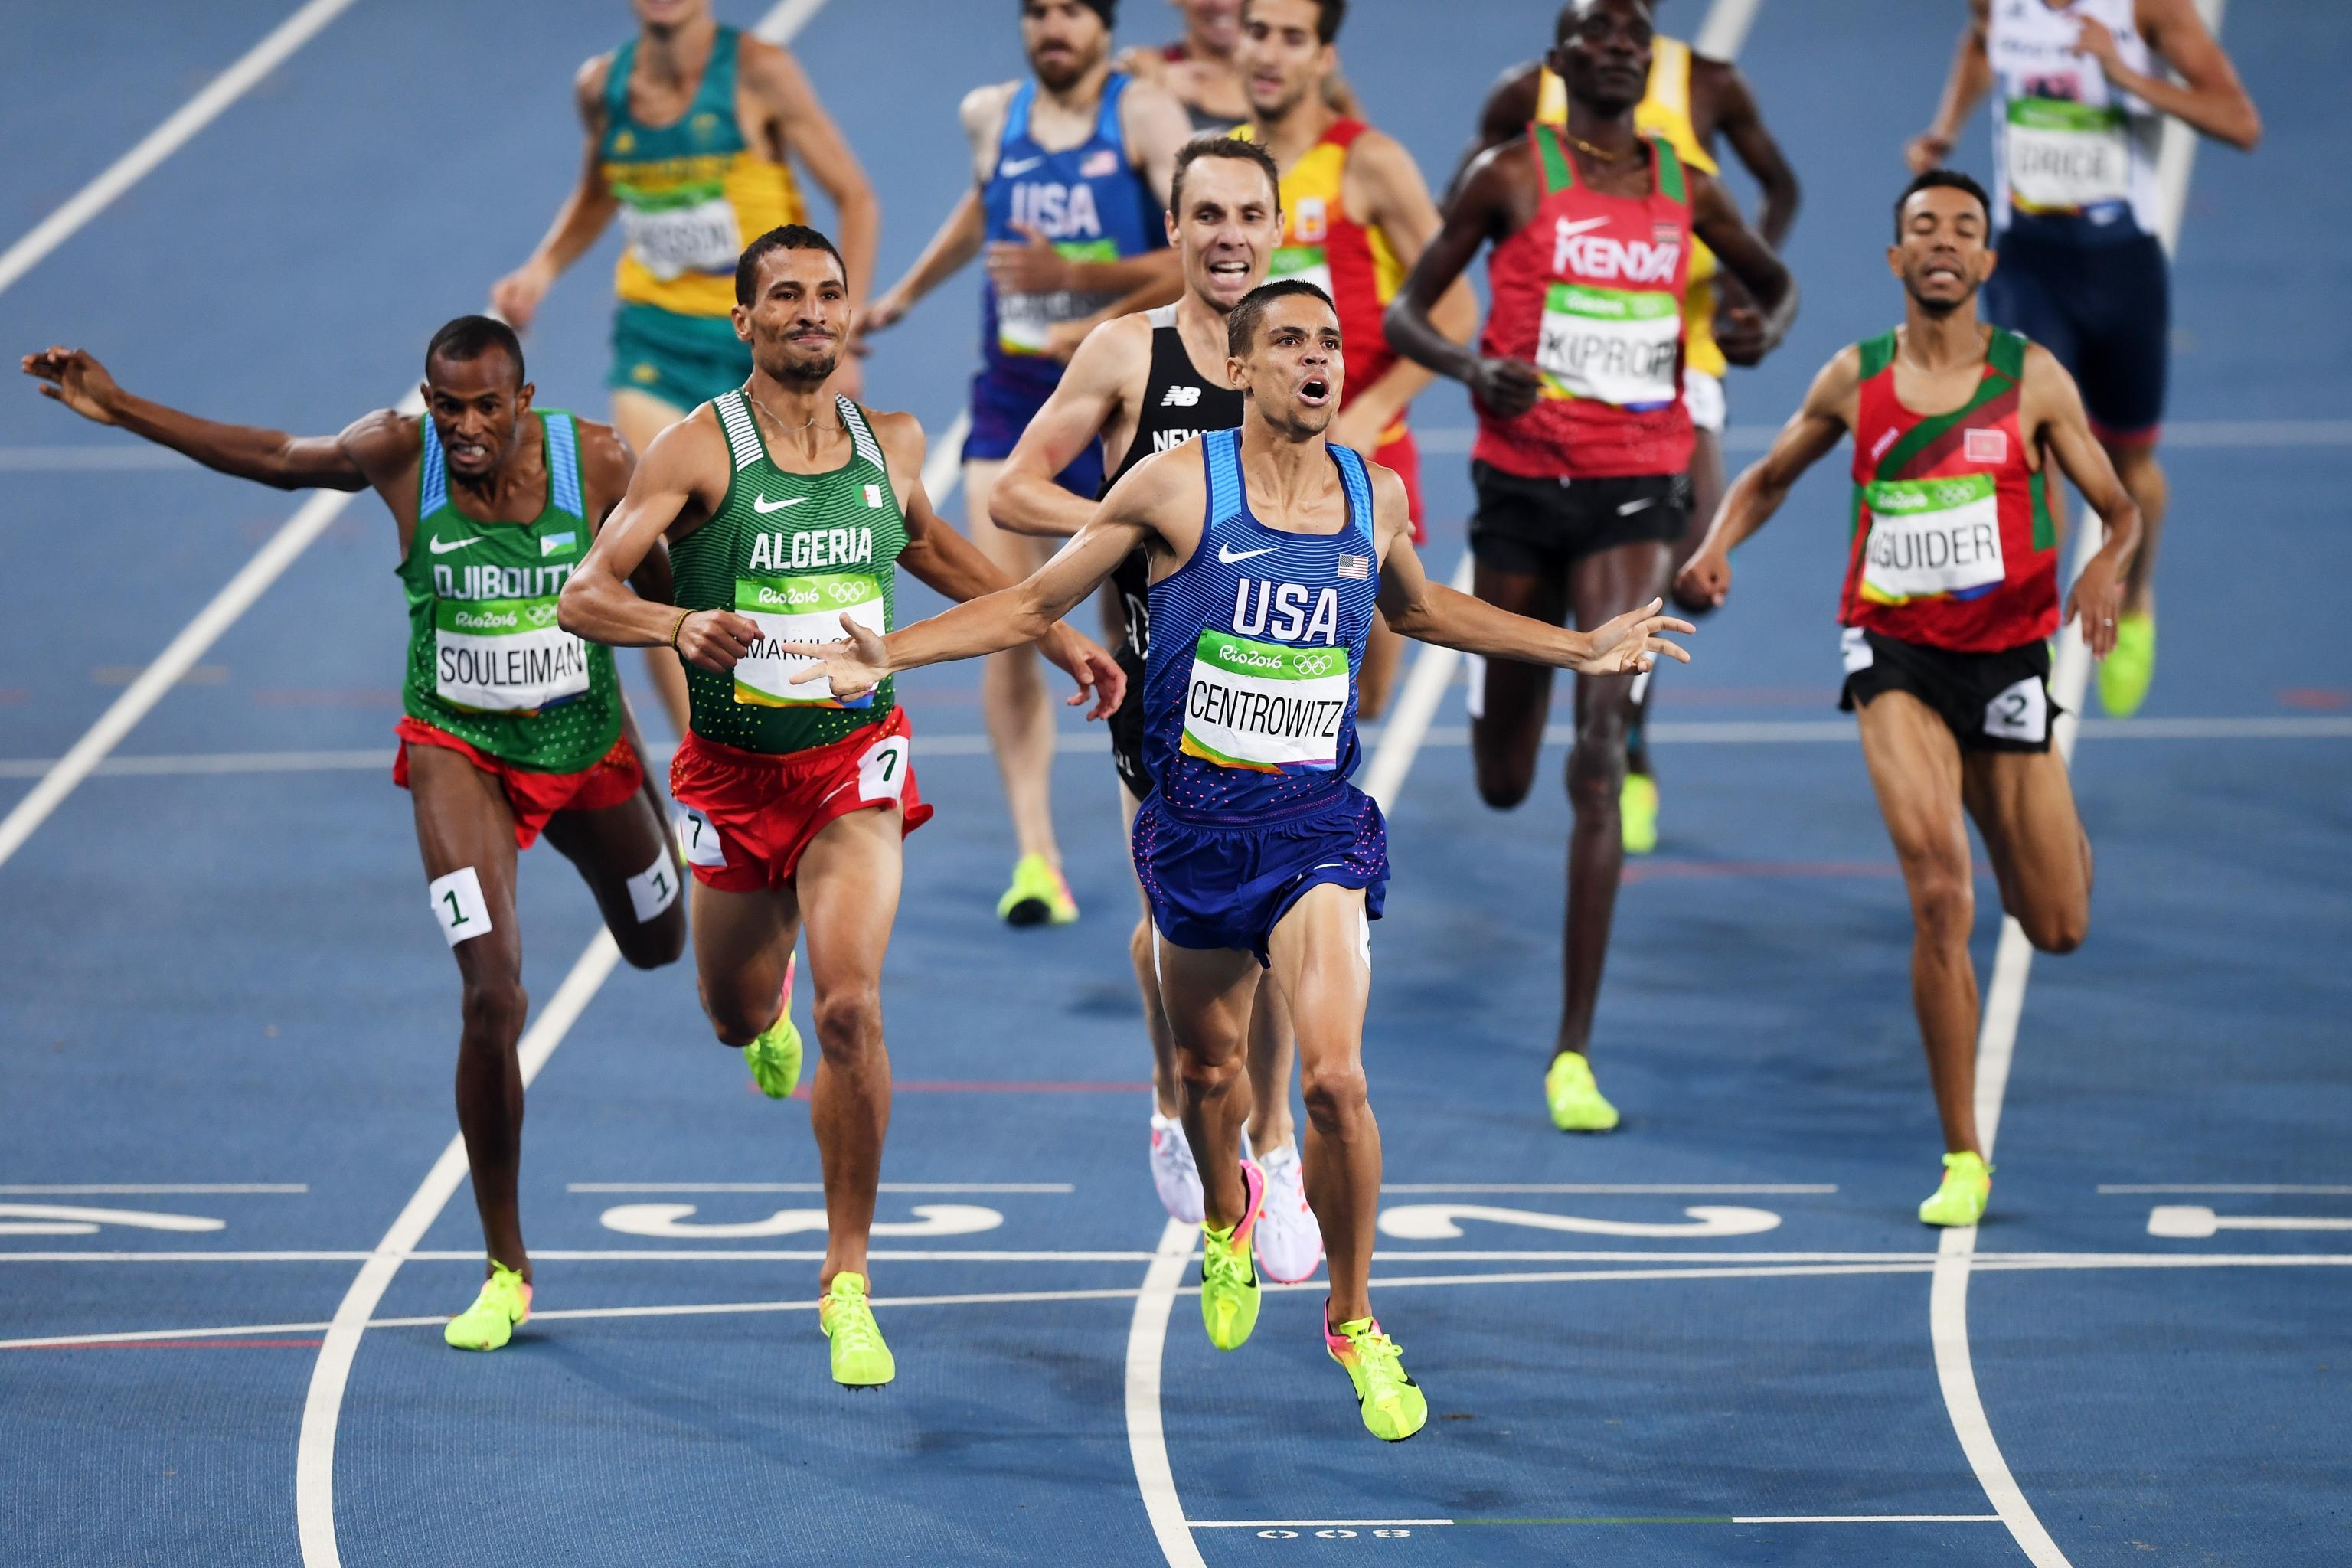 Olympic Track And Field 16 Men S 1 500m Medal Winners Times And Results Bleacher Report Latest News Videos And Highlights